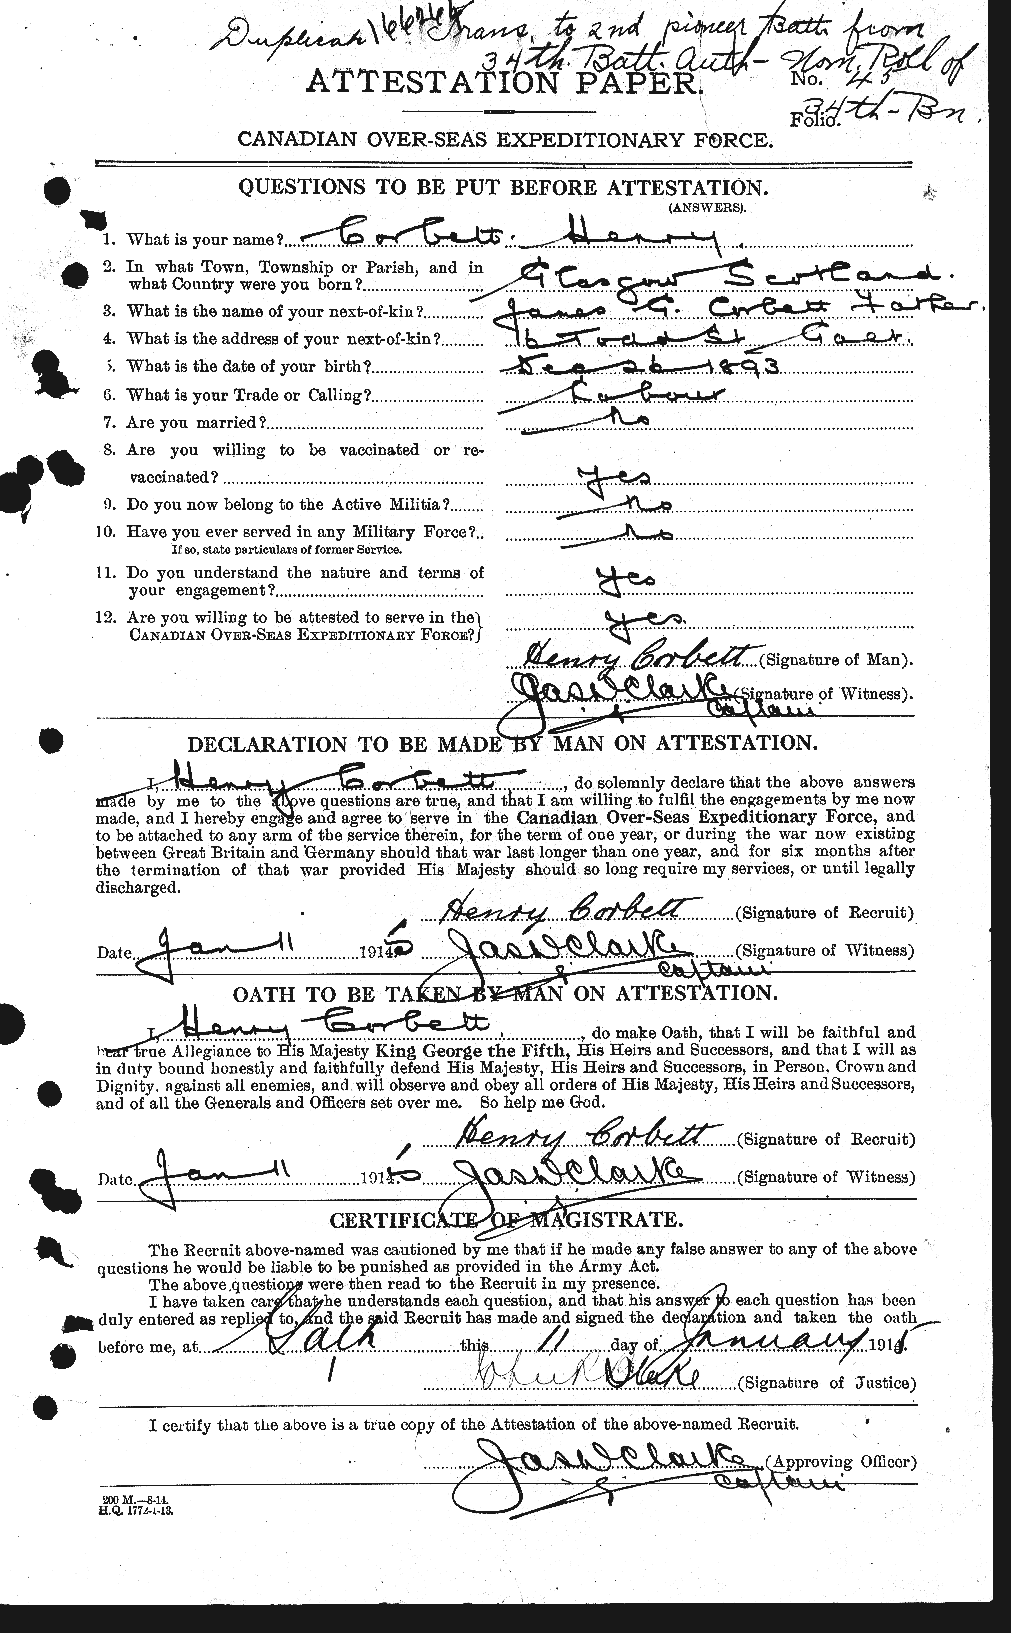 Personnel Records of the First World War - CEF 054770a